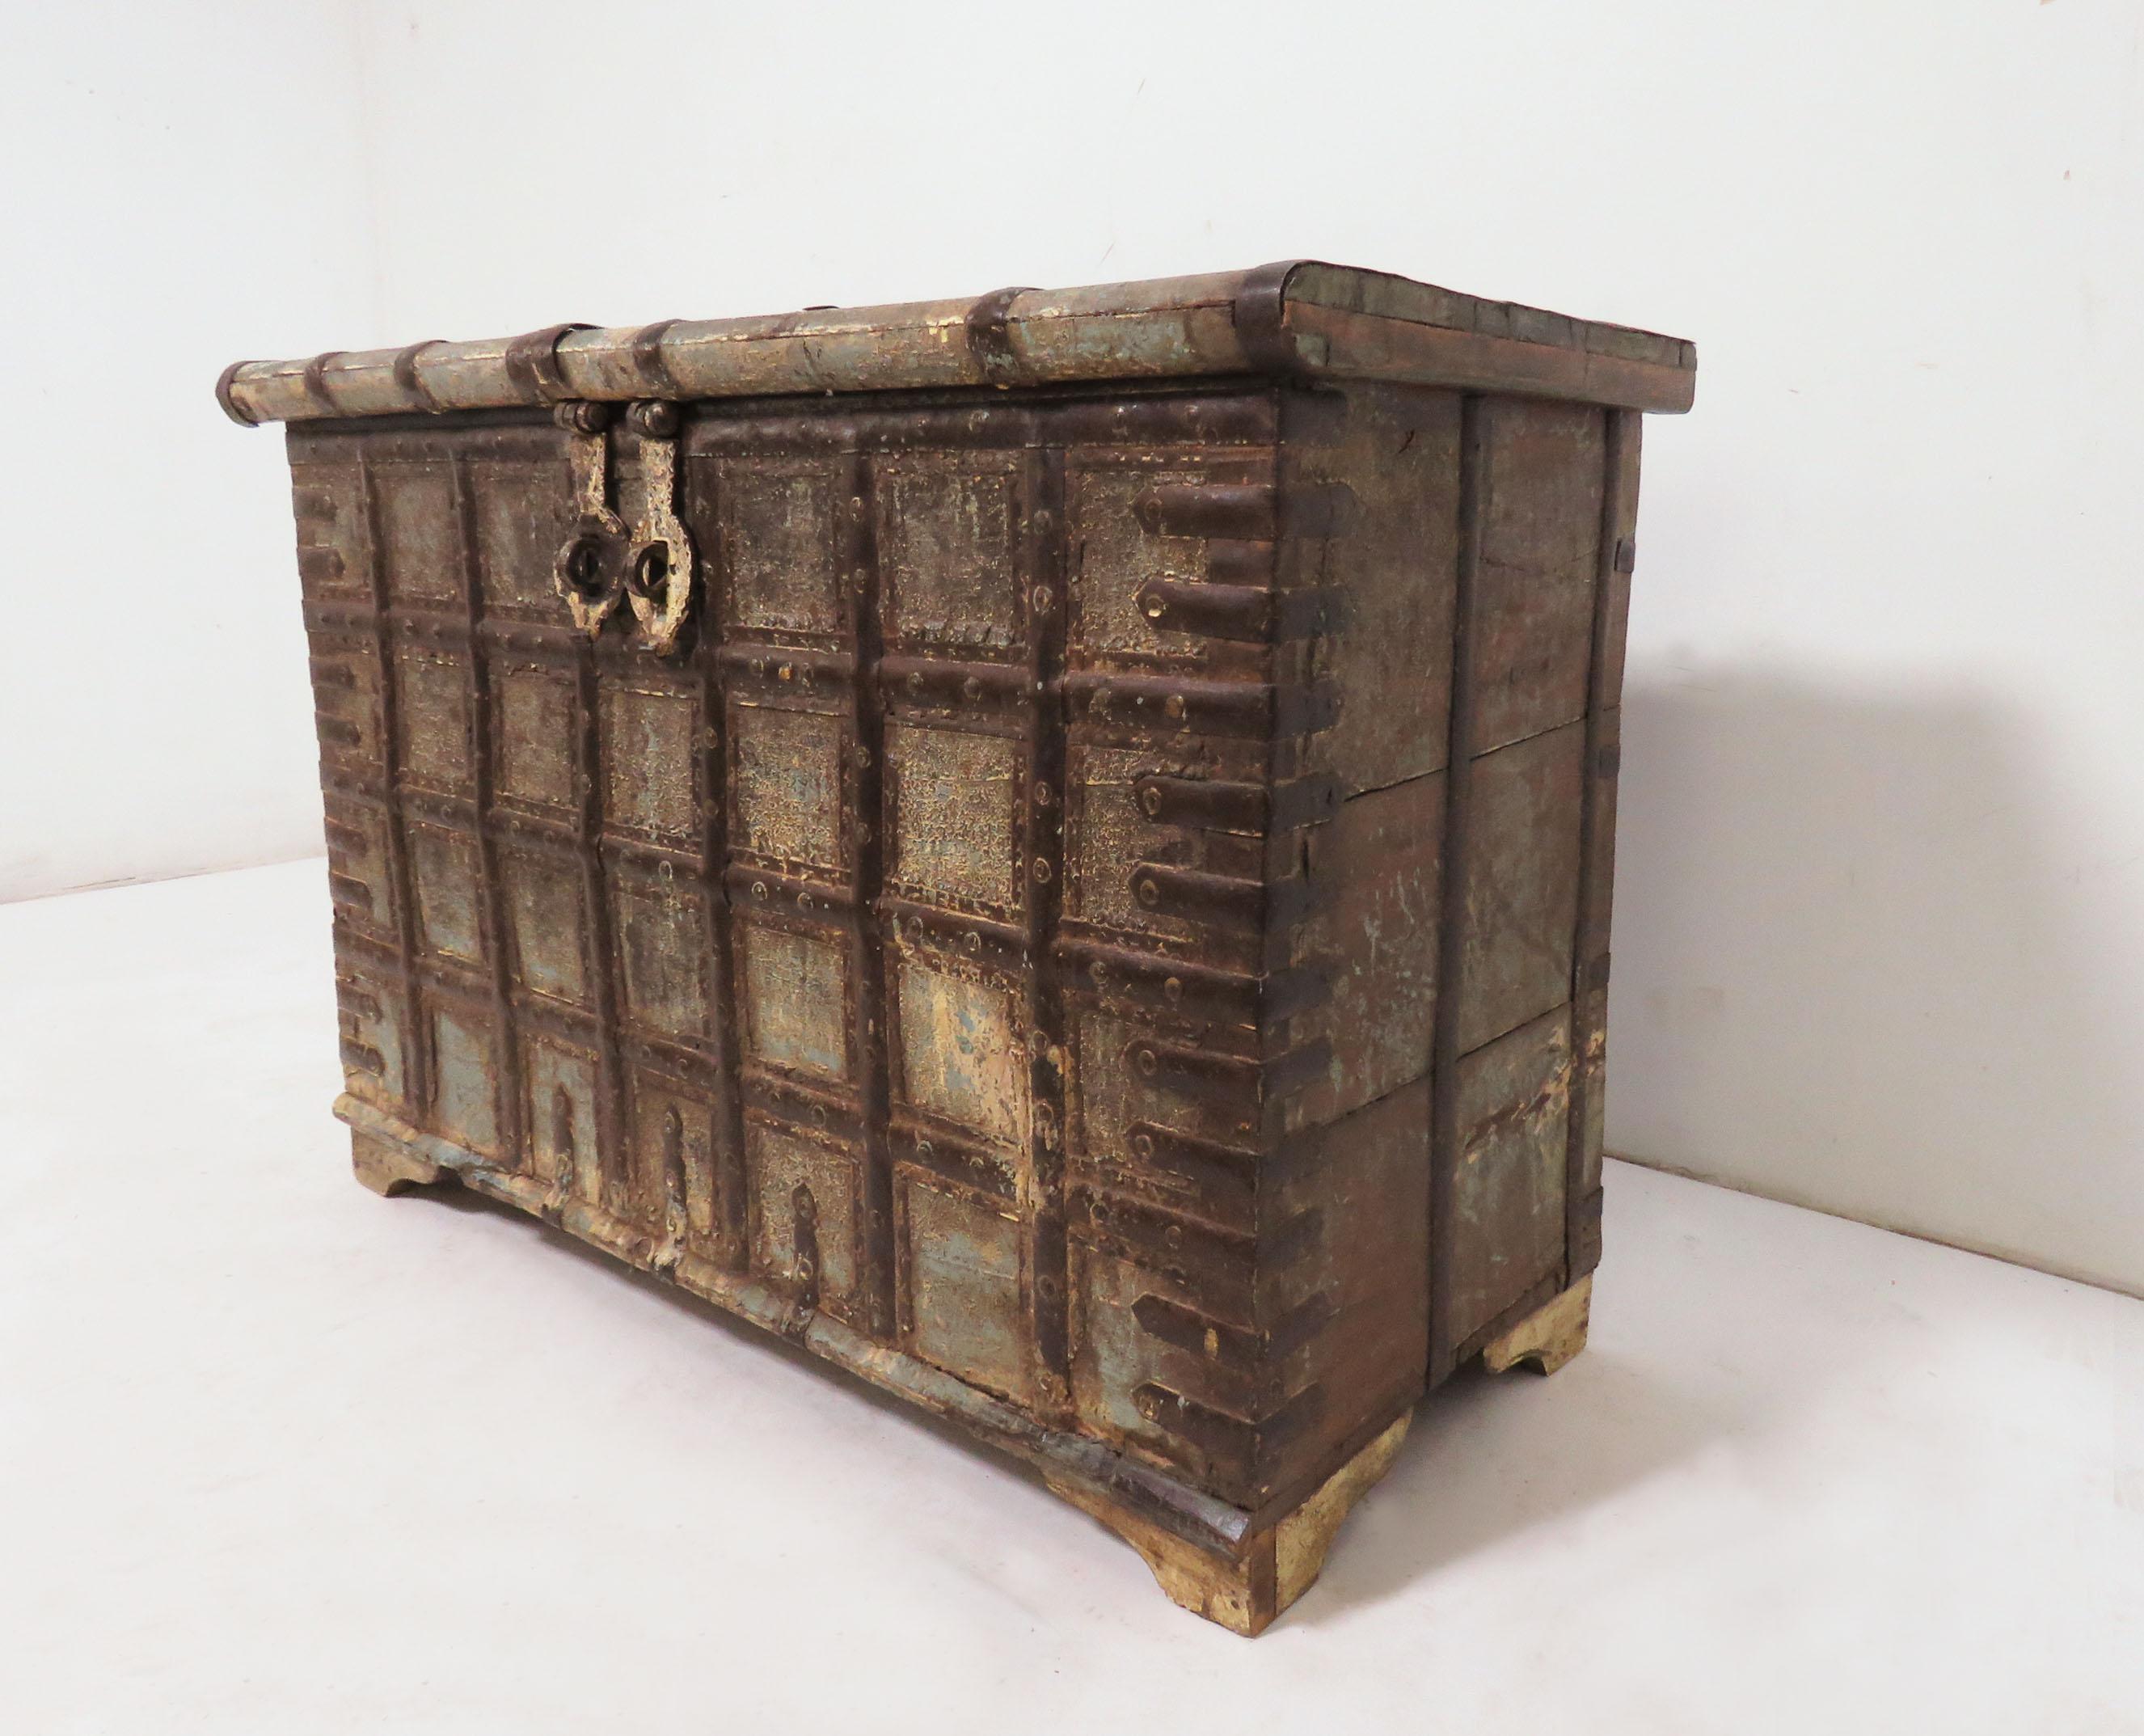 Antique 19th century Damchiya dowry chest, from Rajasthan, India. Faded polychrome paint with patinated strap work.